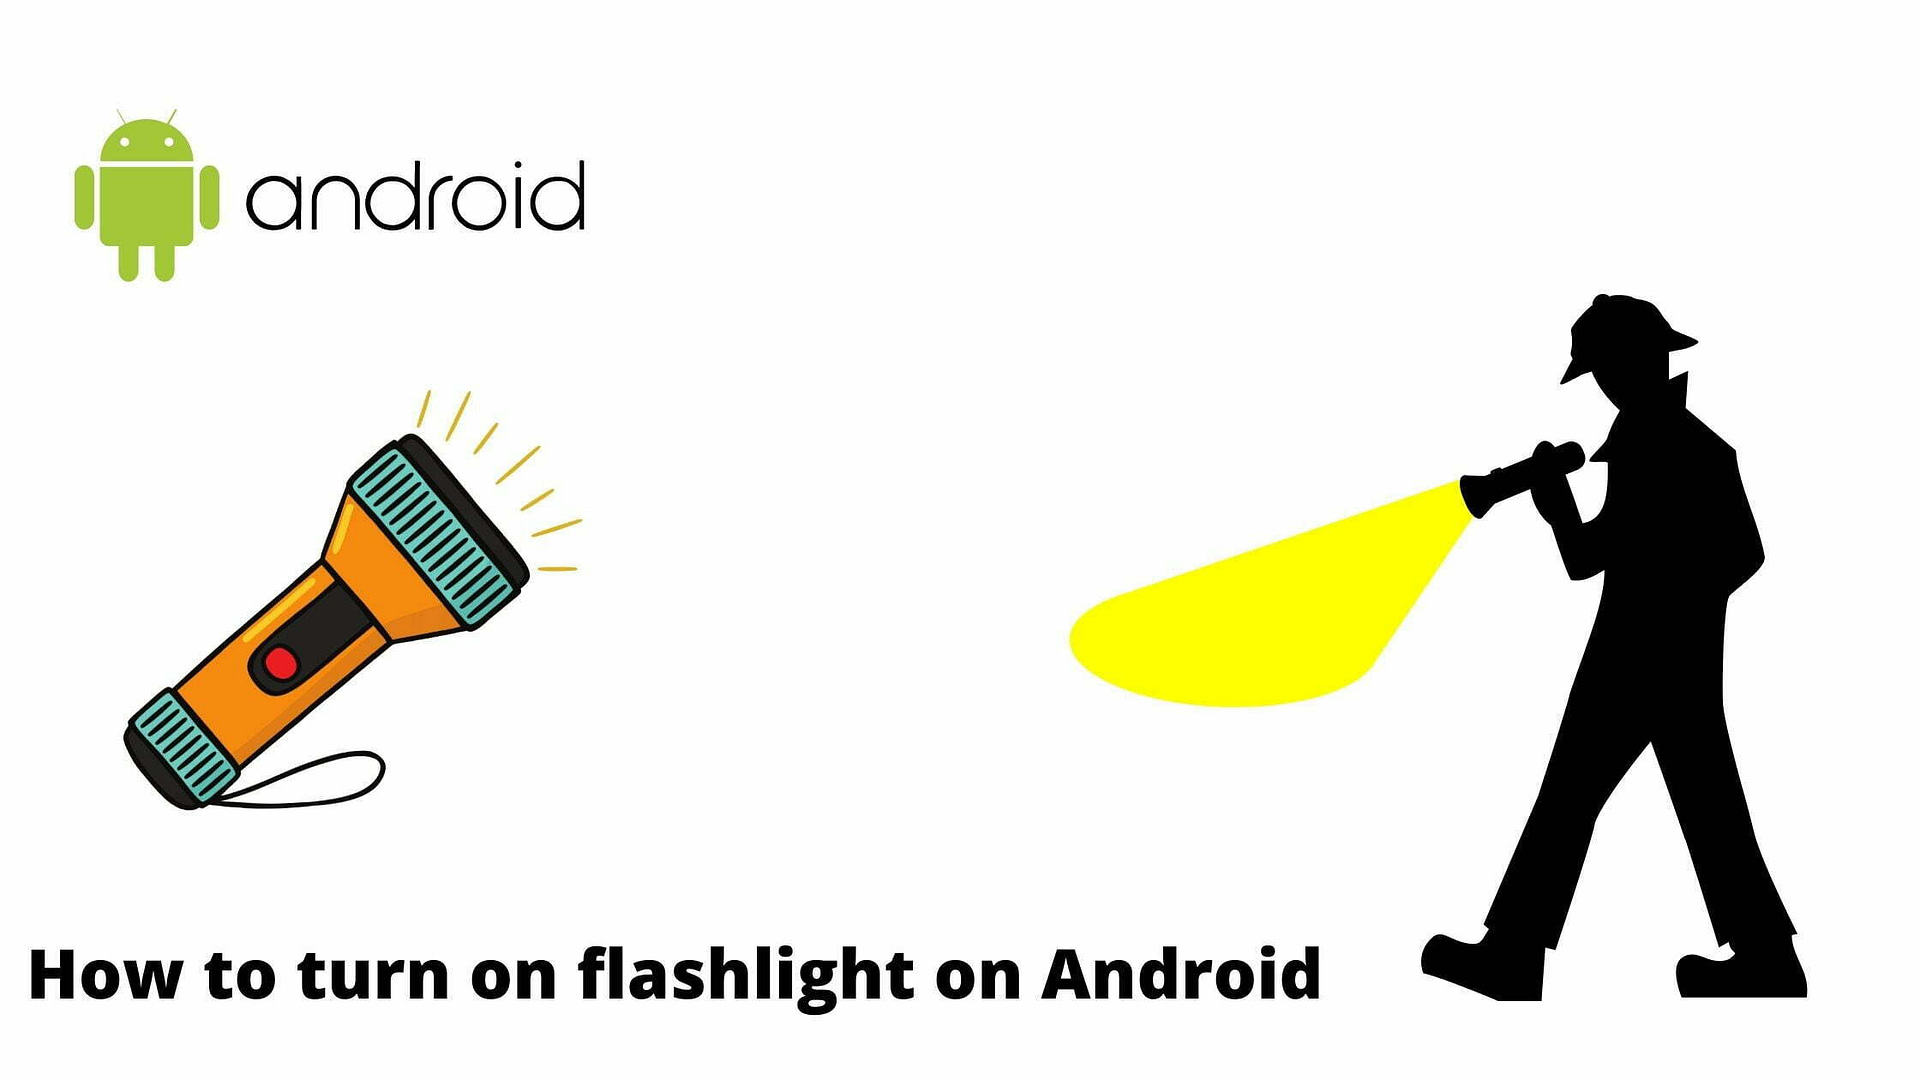 How to turn on flashlight on Android